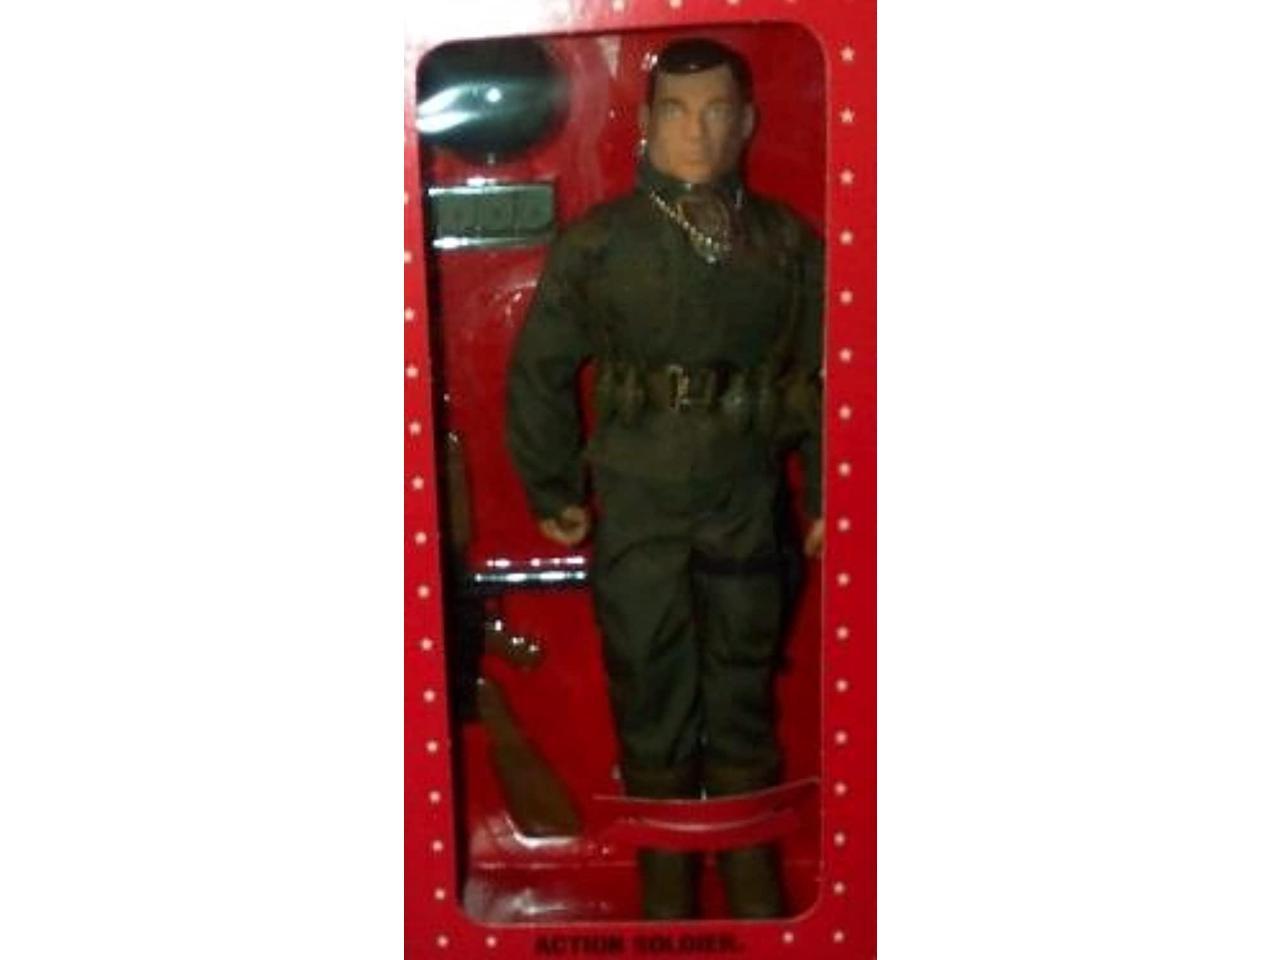 Joe Pilot 12 Limited WWII 50th Anniversary Commemorative Edition Action Figure for sale online Hasbro G.I